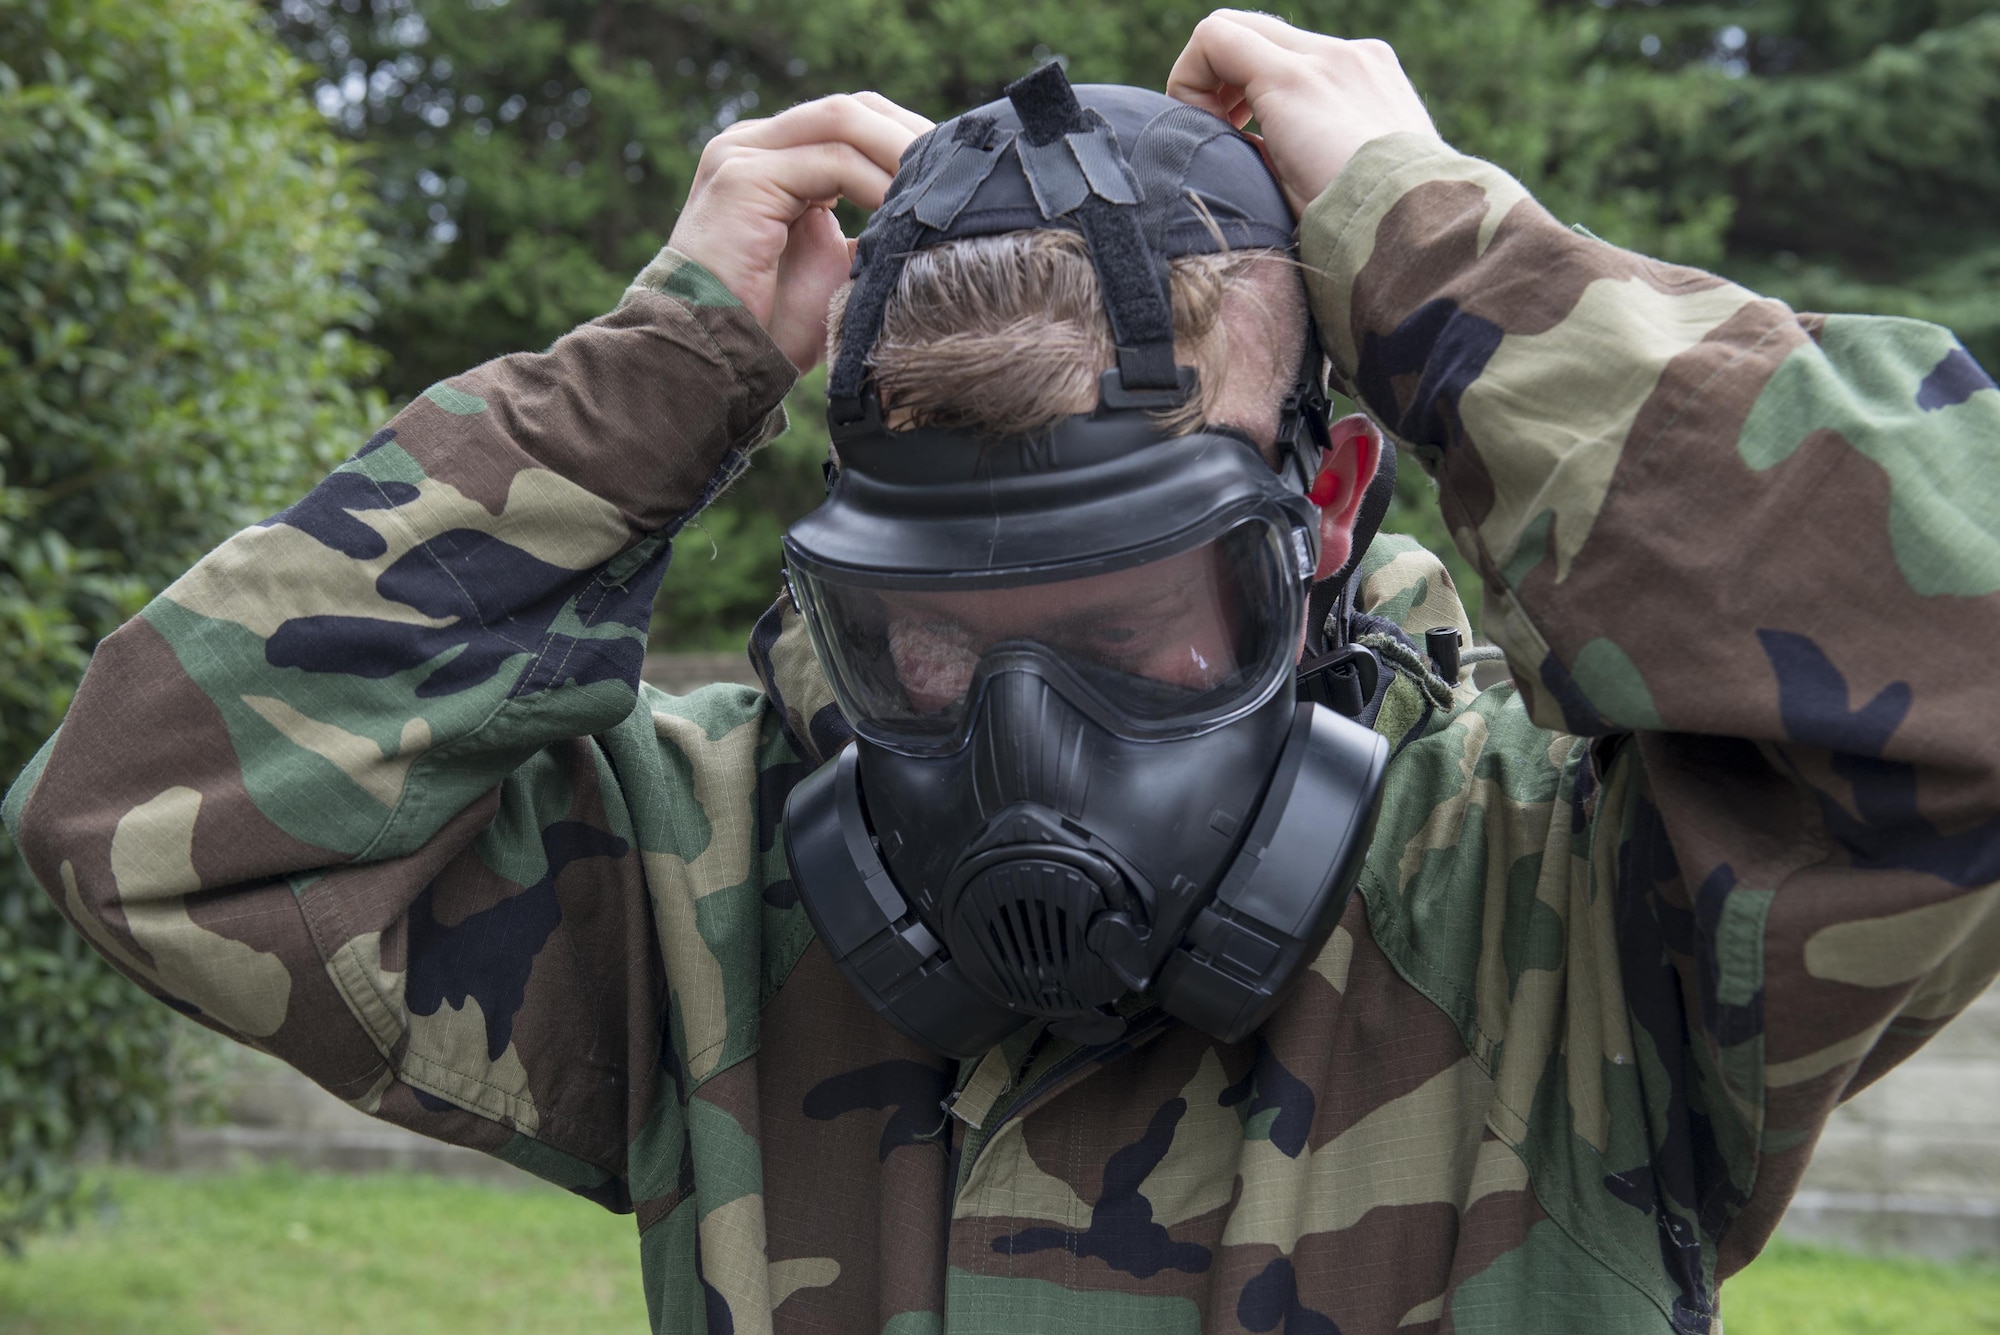 Tech. Sgt. Ryan Karr, 374th Civil Engineer Squadron Airmen dormitory leader, dons a chemical protective mask during a Chemical, Biological, Radiological, Nuclear and Explosives defense class at the Camp Warlord training ground at Yokota Air Base, Japan, Aug. 10, 2016. Airmen are trained to don their protective gear quickly in case of real-world emergencies, mitigating their possible exposure to airborne hazards. (U.S. Air Force photo by Senior Airman David C. Danford/Released)